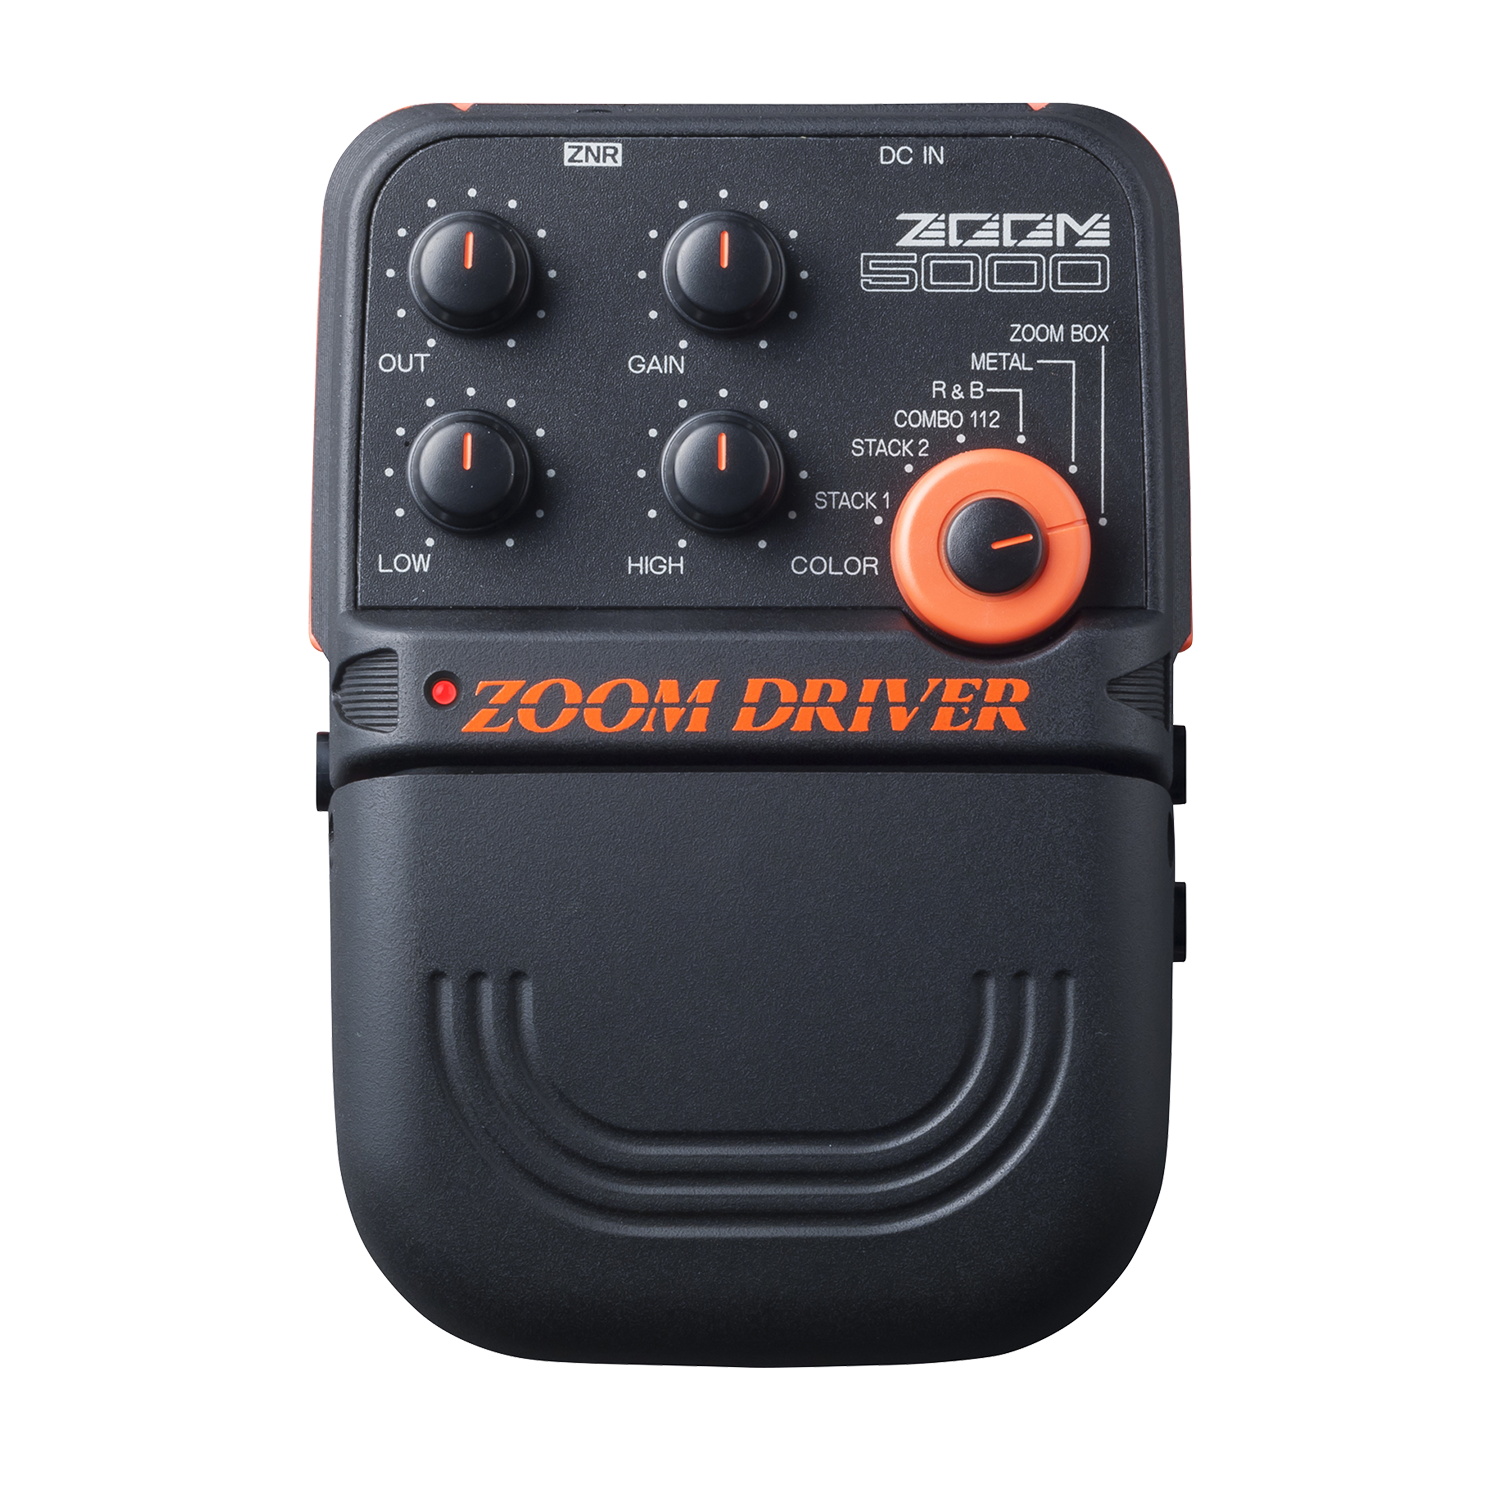 5000 ZOOM DRIVER | Zoom